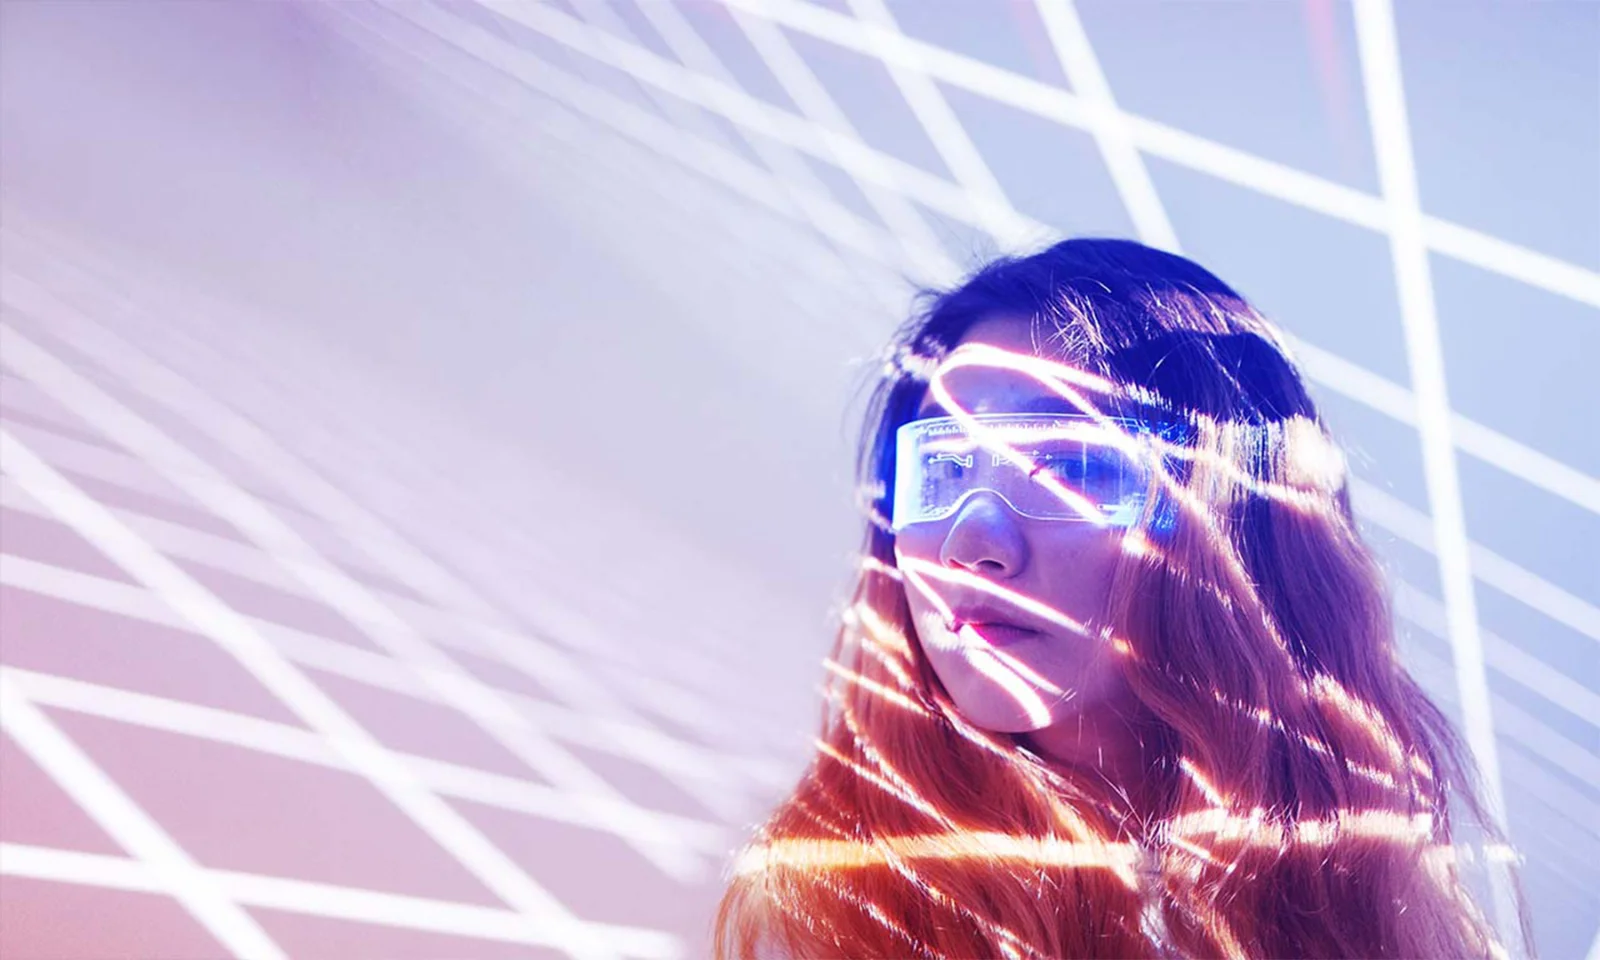 This image captures the essence of innovation with a futuristic aesthetic. A woman, adorned in high-tech glasses, is bathed in intersecting lines of light that create a dynamic and modern visual effect. The background features soft hues of purple and pink, enhancing the sense of technological advancement and forward-thinking. This visual perfectly embodies the spirit of cutting-edge innovation and the integration of technology in everyday life.